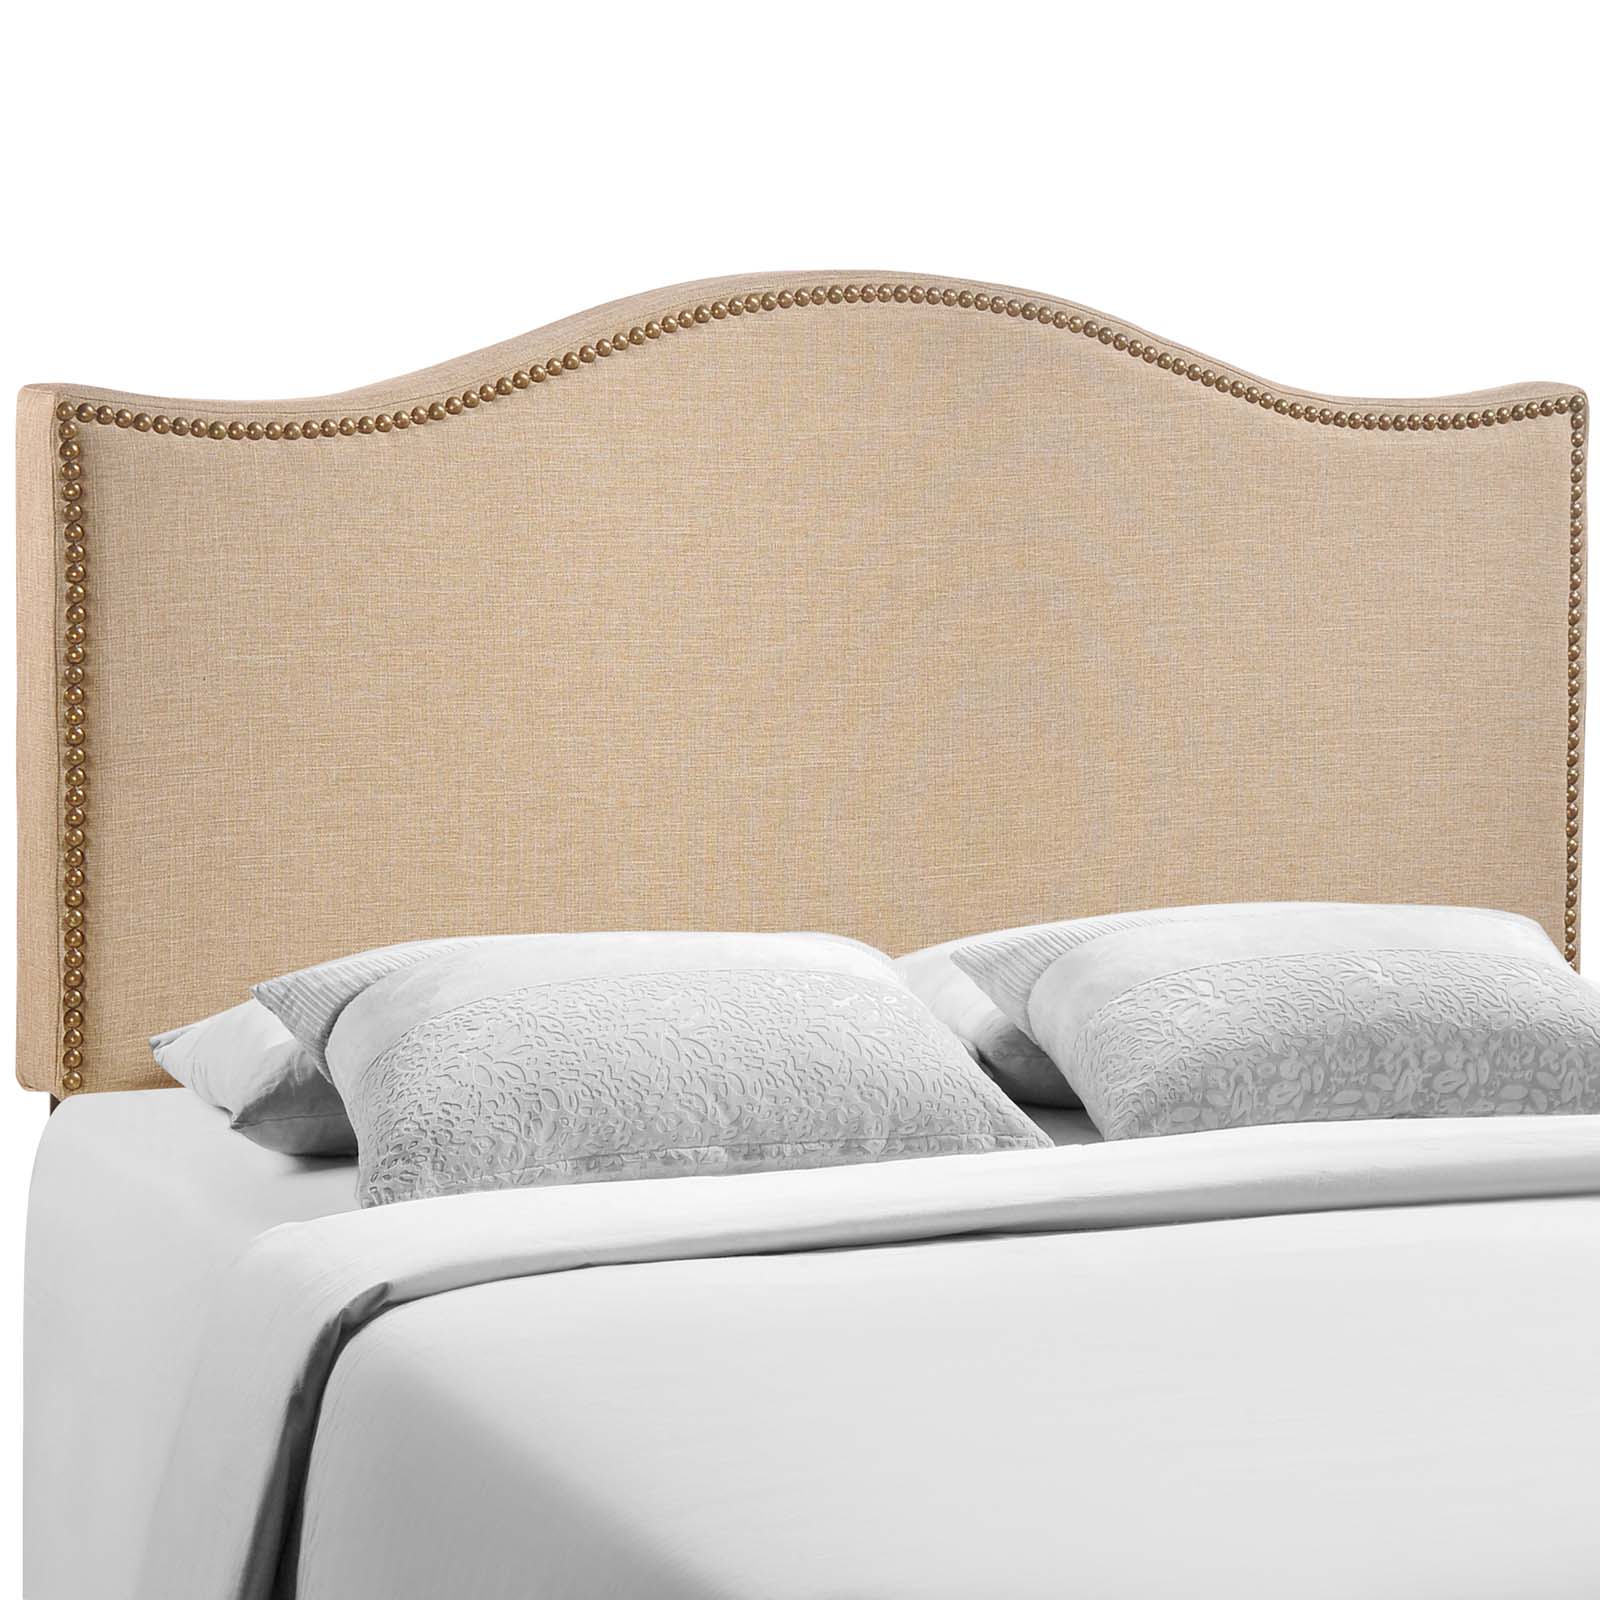 Modway Headboards - Curl Queen Nailhead Upholstered Headboard Cafe